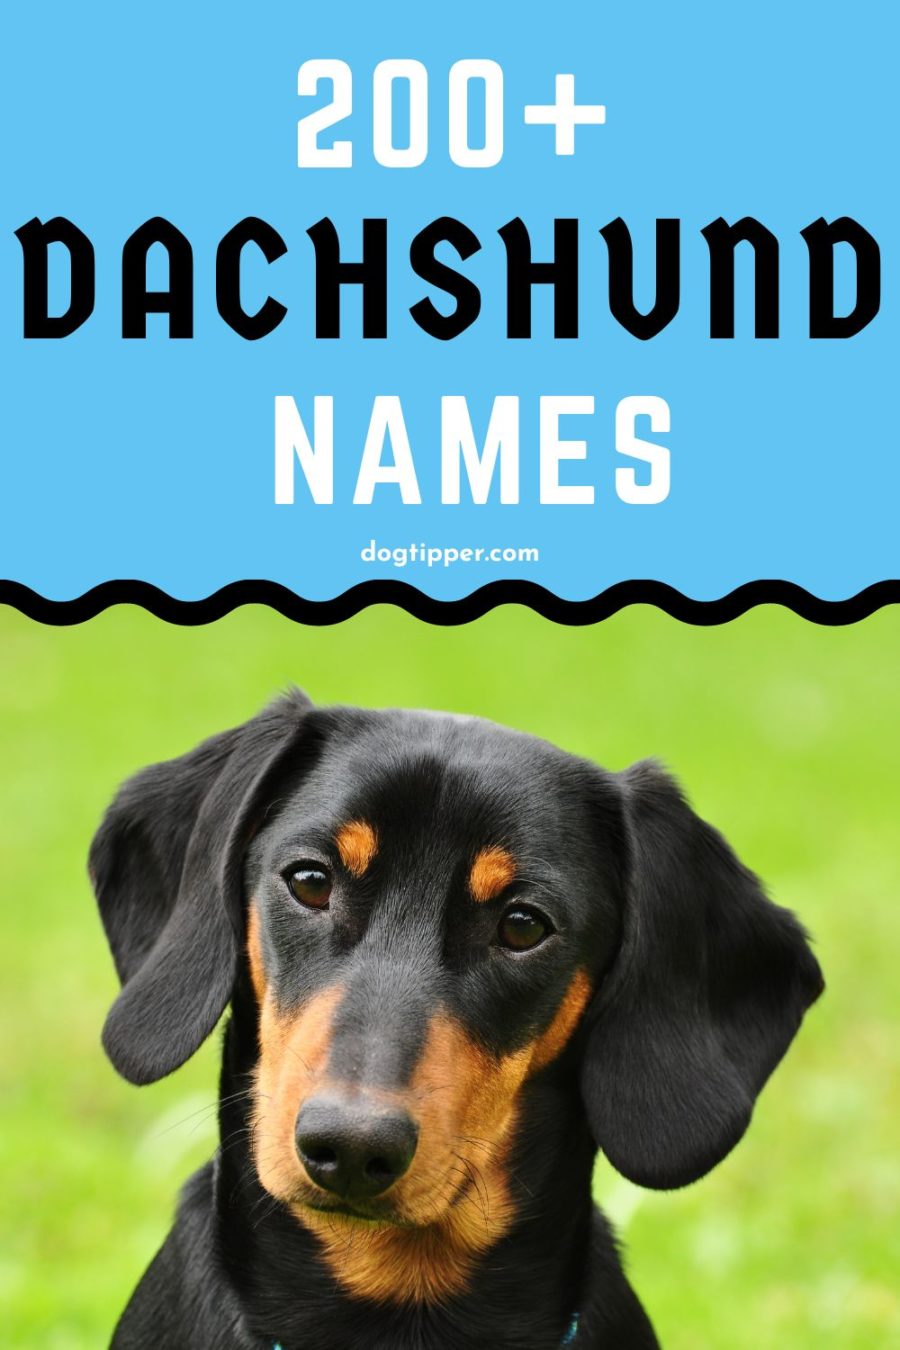 200+ Dachshund Names for Your New Sausage Dog!